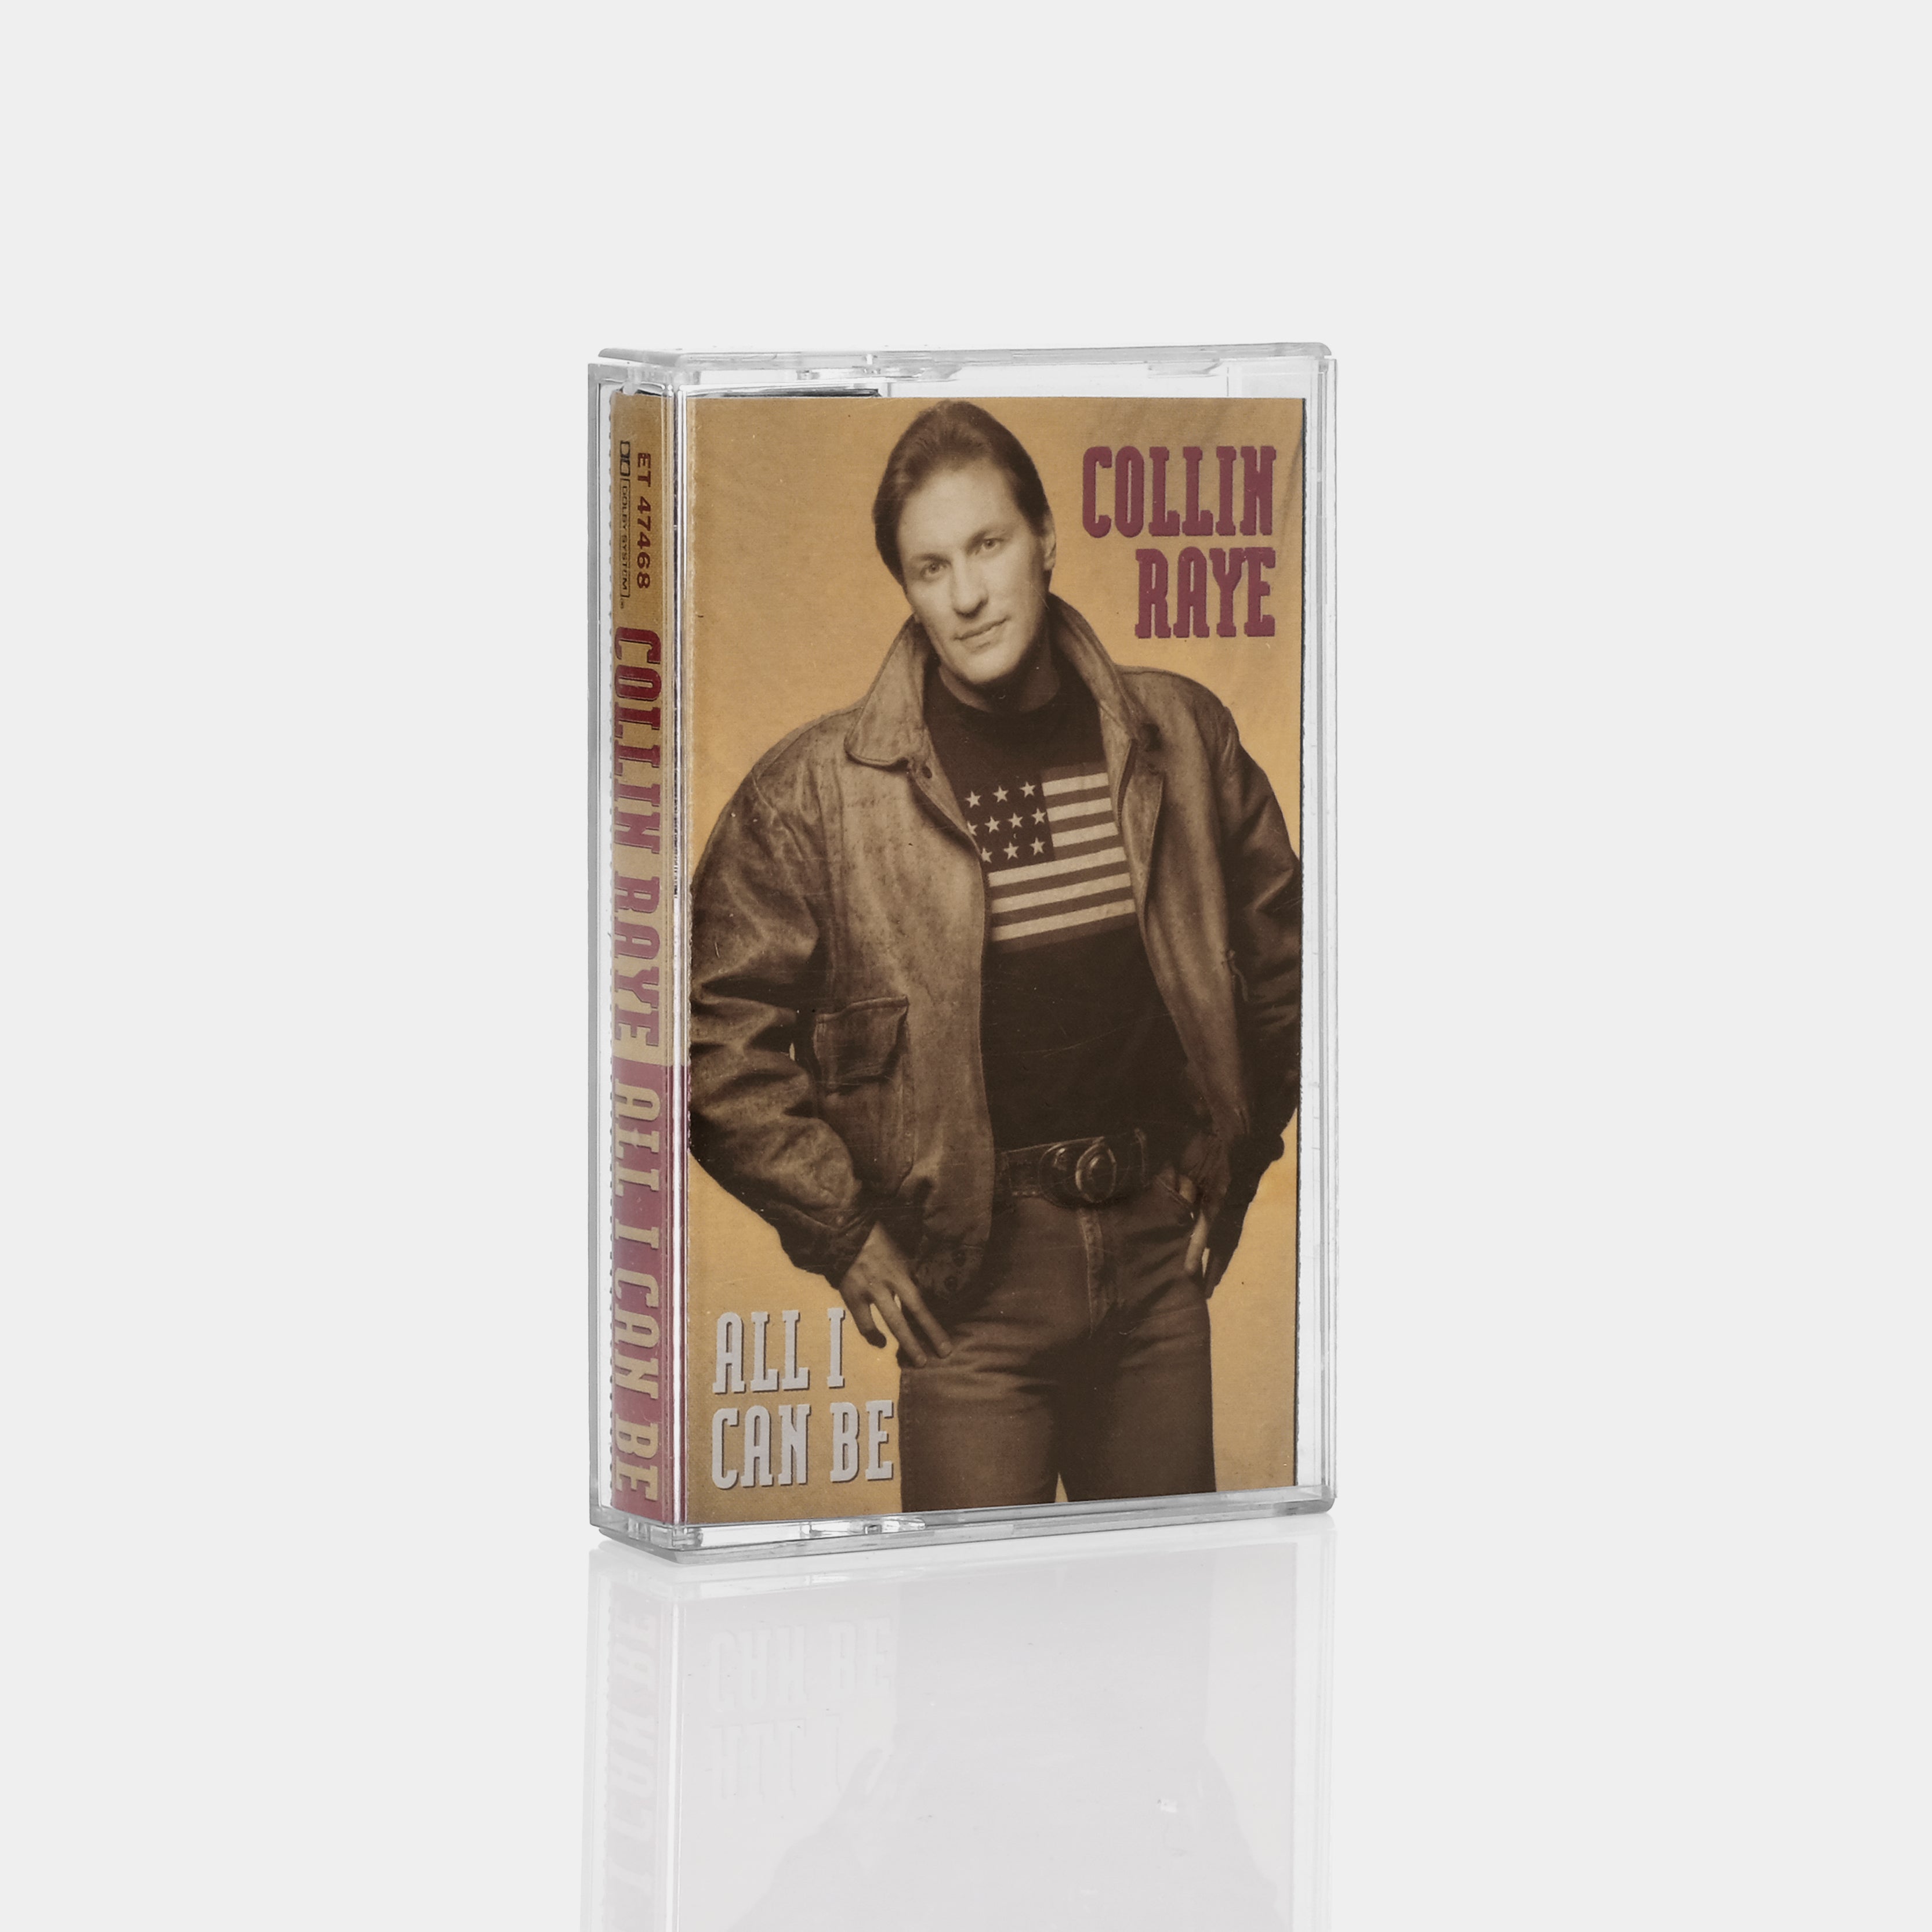 Collin Raye - All I Can Be Cassette Tape